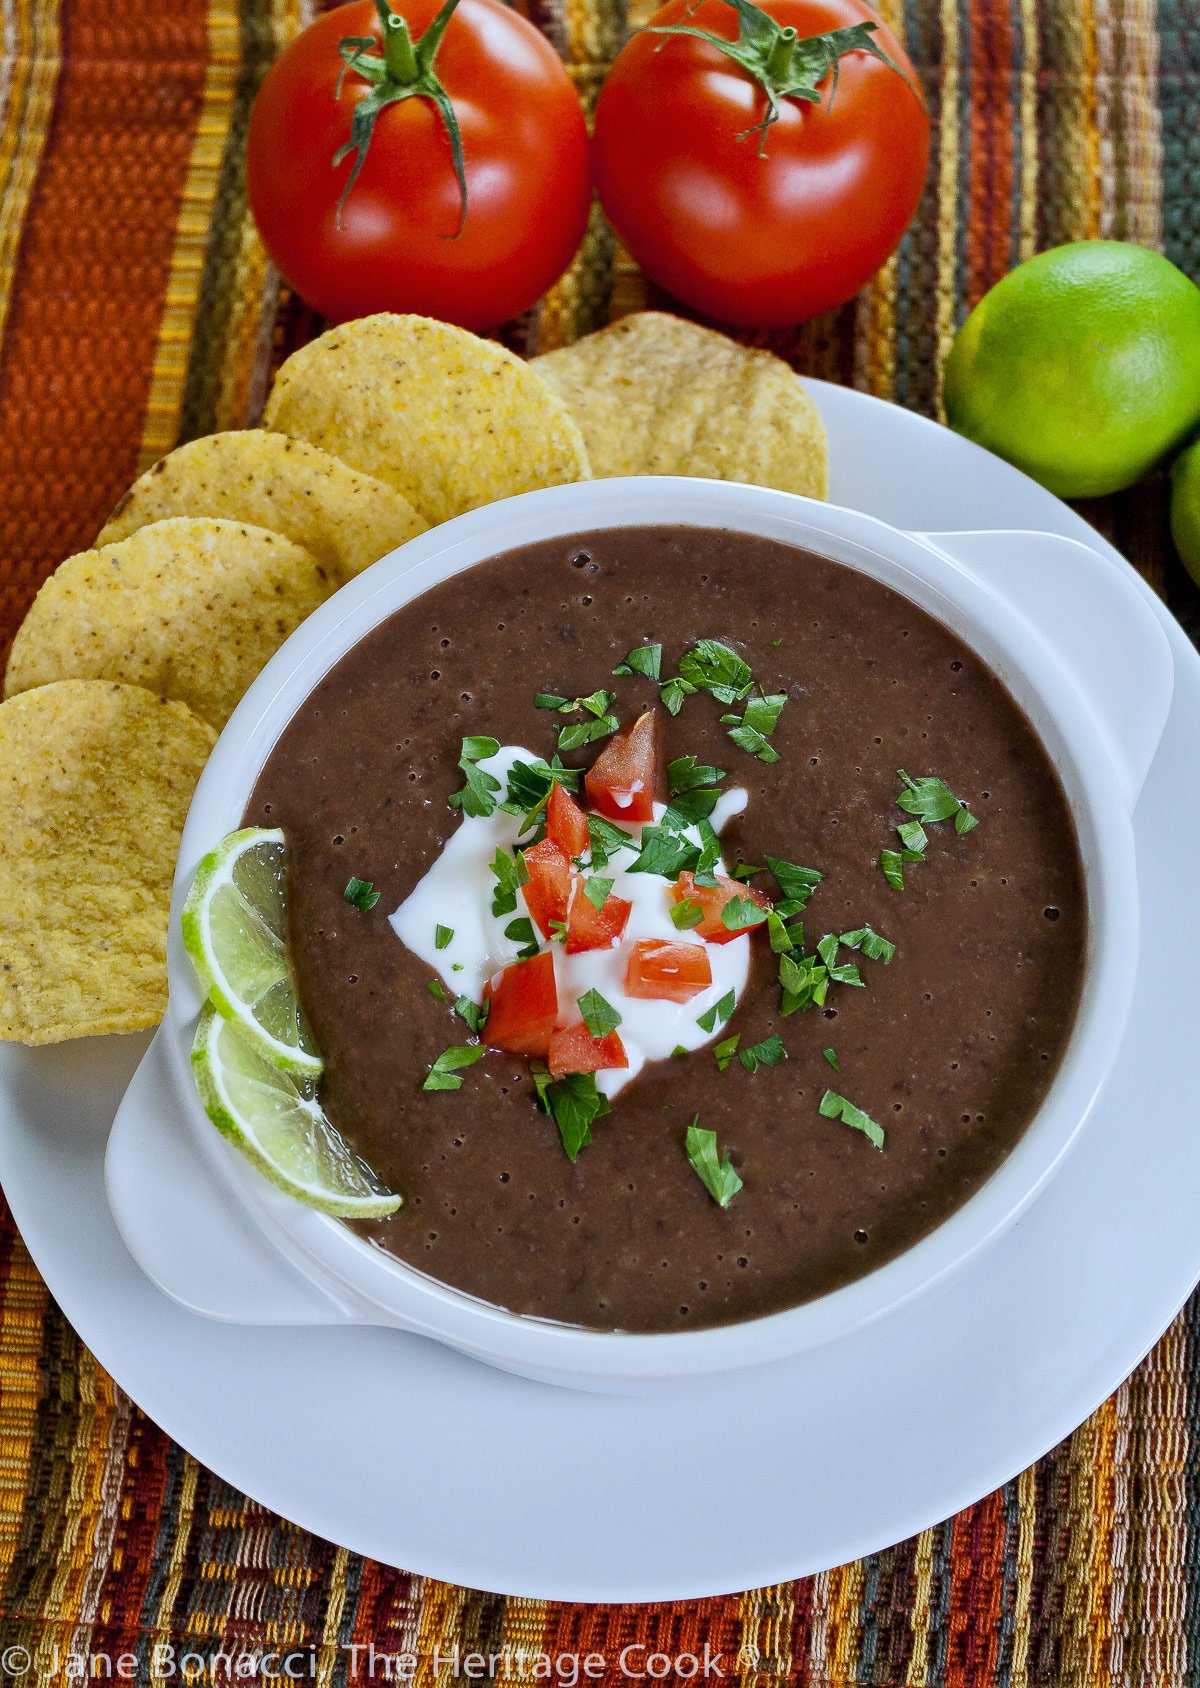 Dark black bean soup in white bowls garnished with cream, tomatoes, and chopped cilantro and lime slices, with tortilla chips alongside; Chipotle Black Bean Soup with Cilantro Lime Cream (GF) © 2023 Jane Bonacci, The Heritage Cook. 